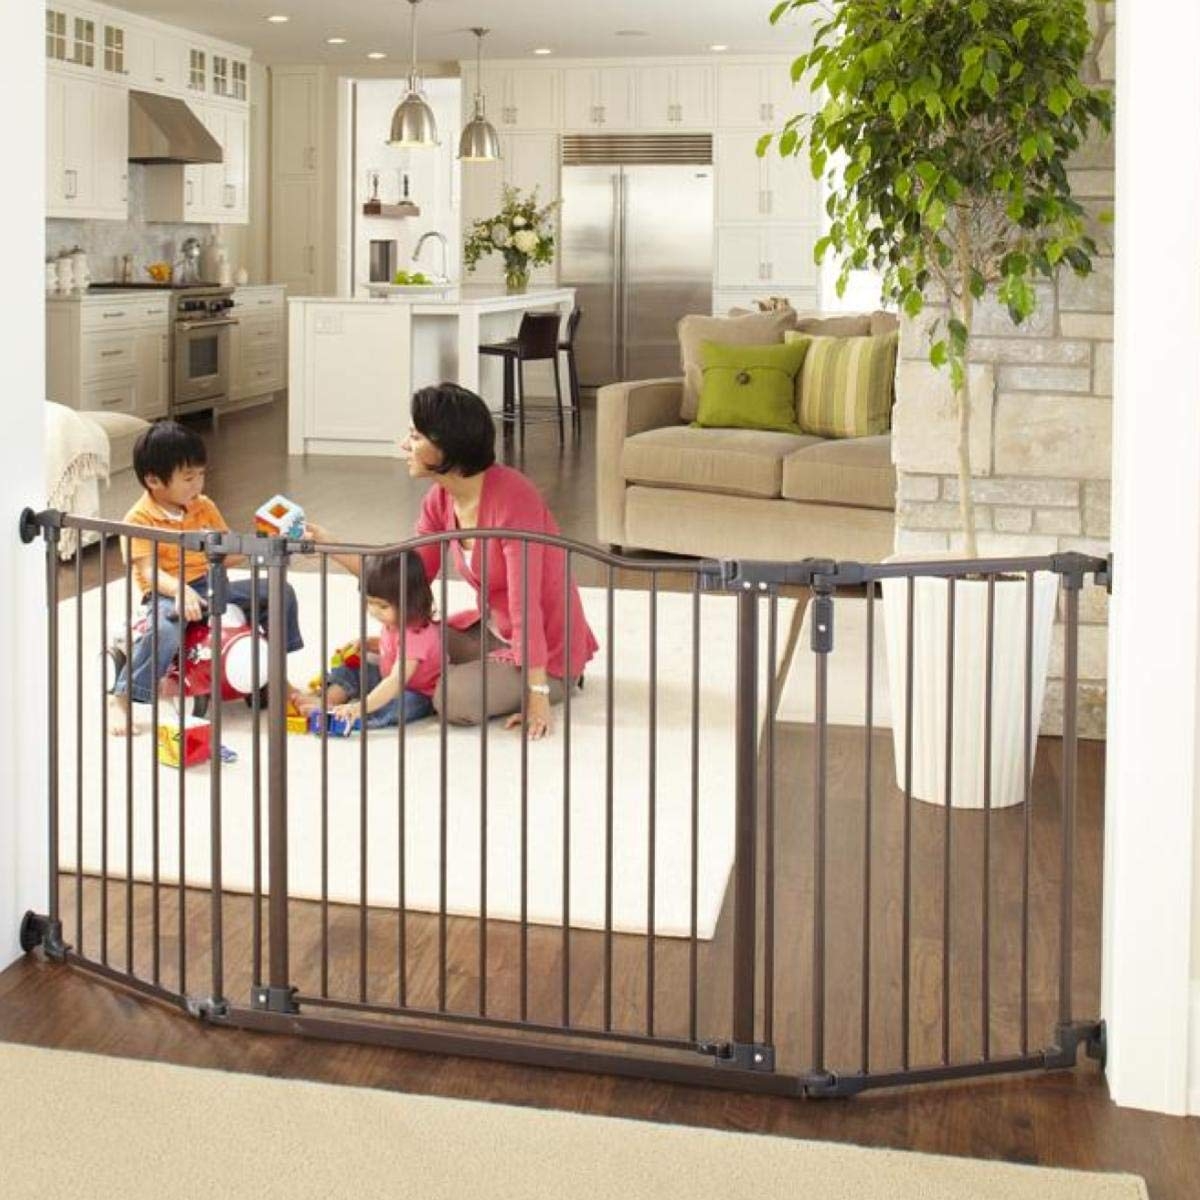 72 inch baby gate pressure mounted